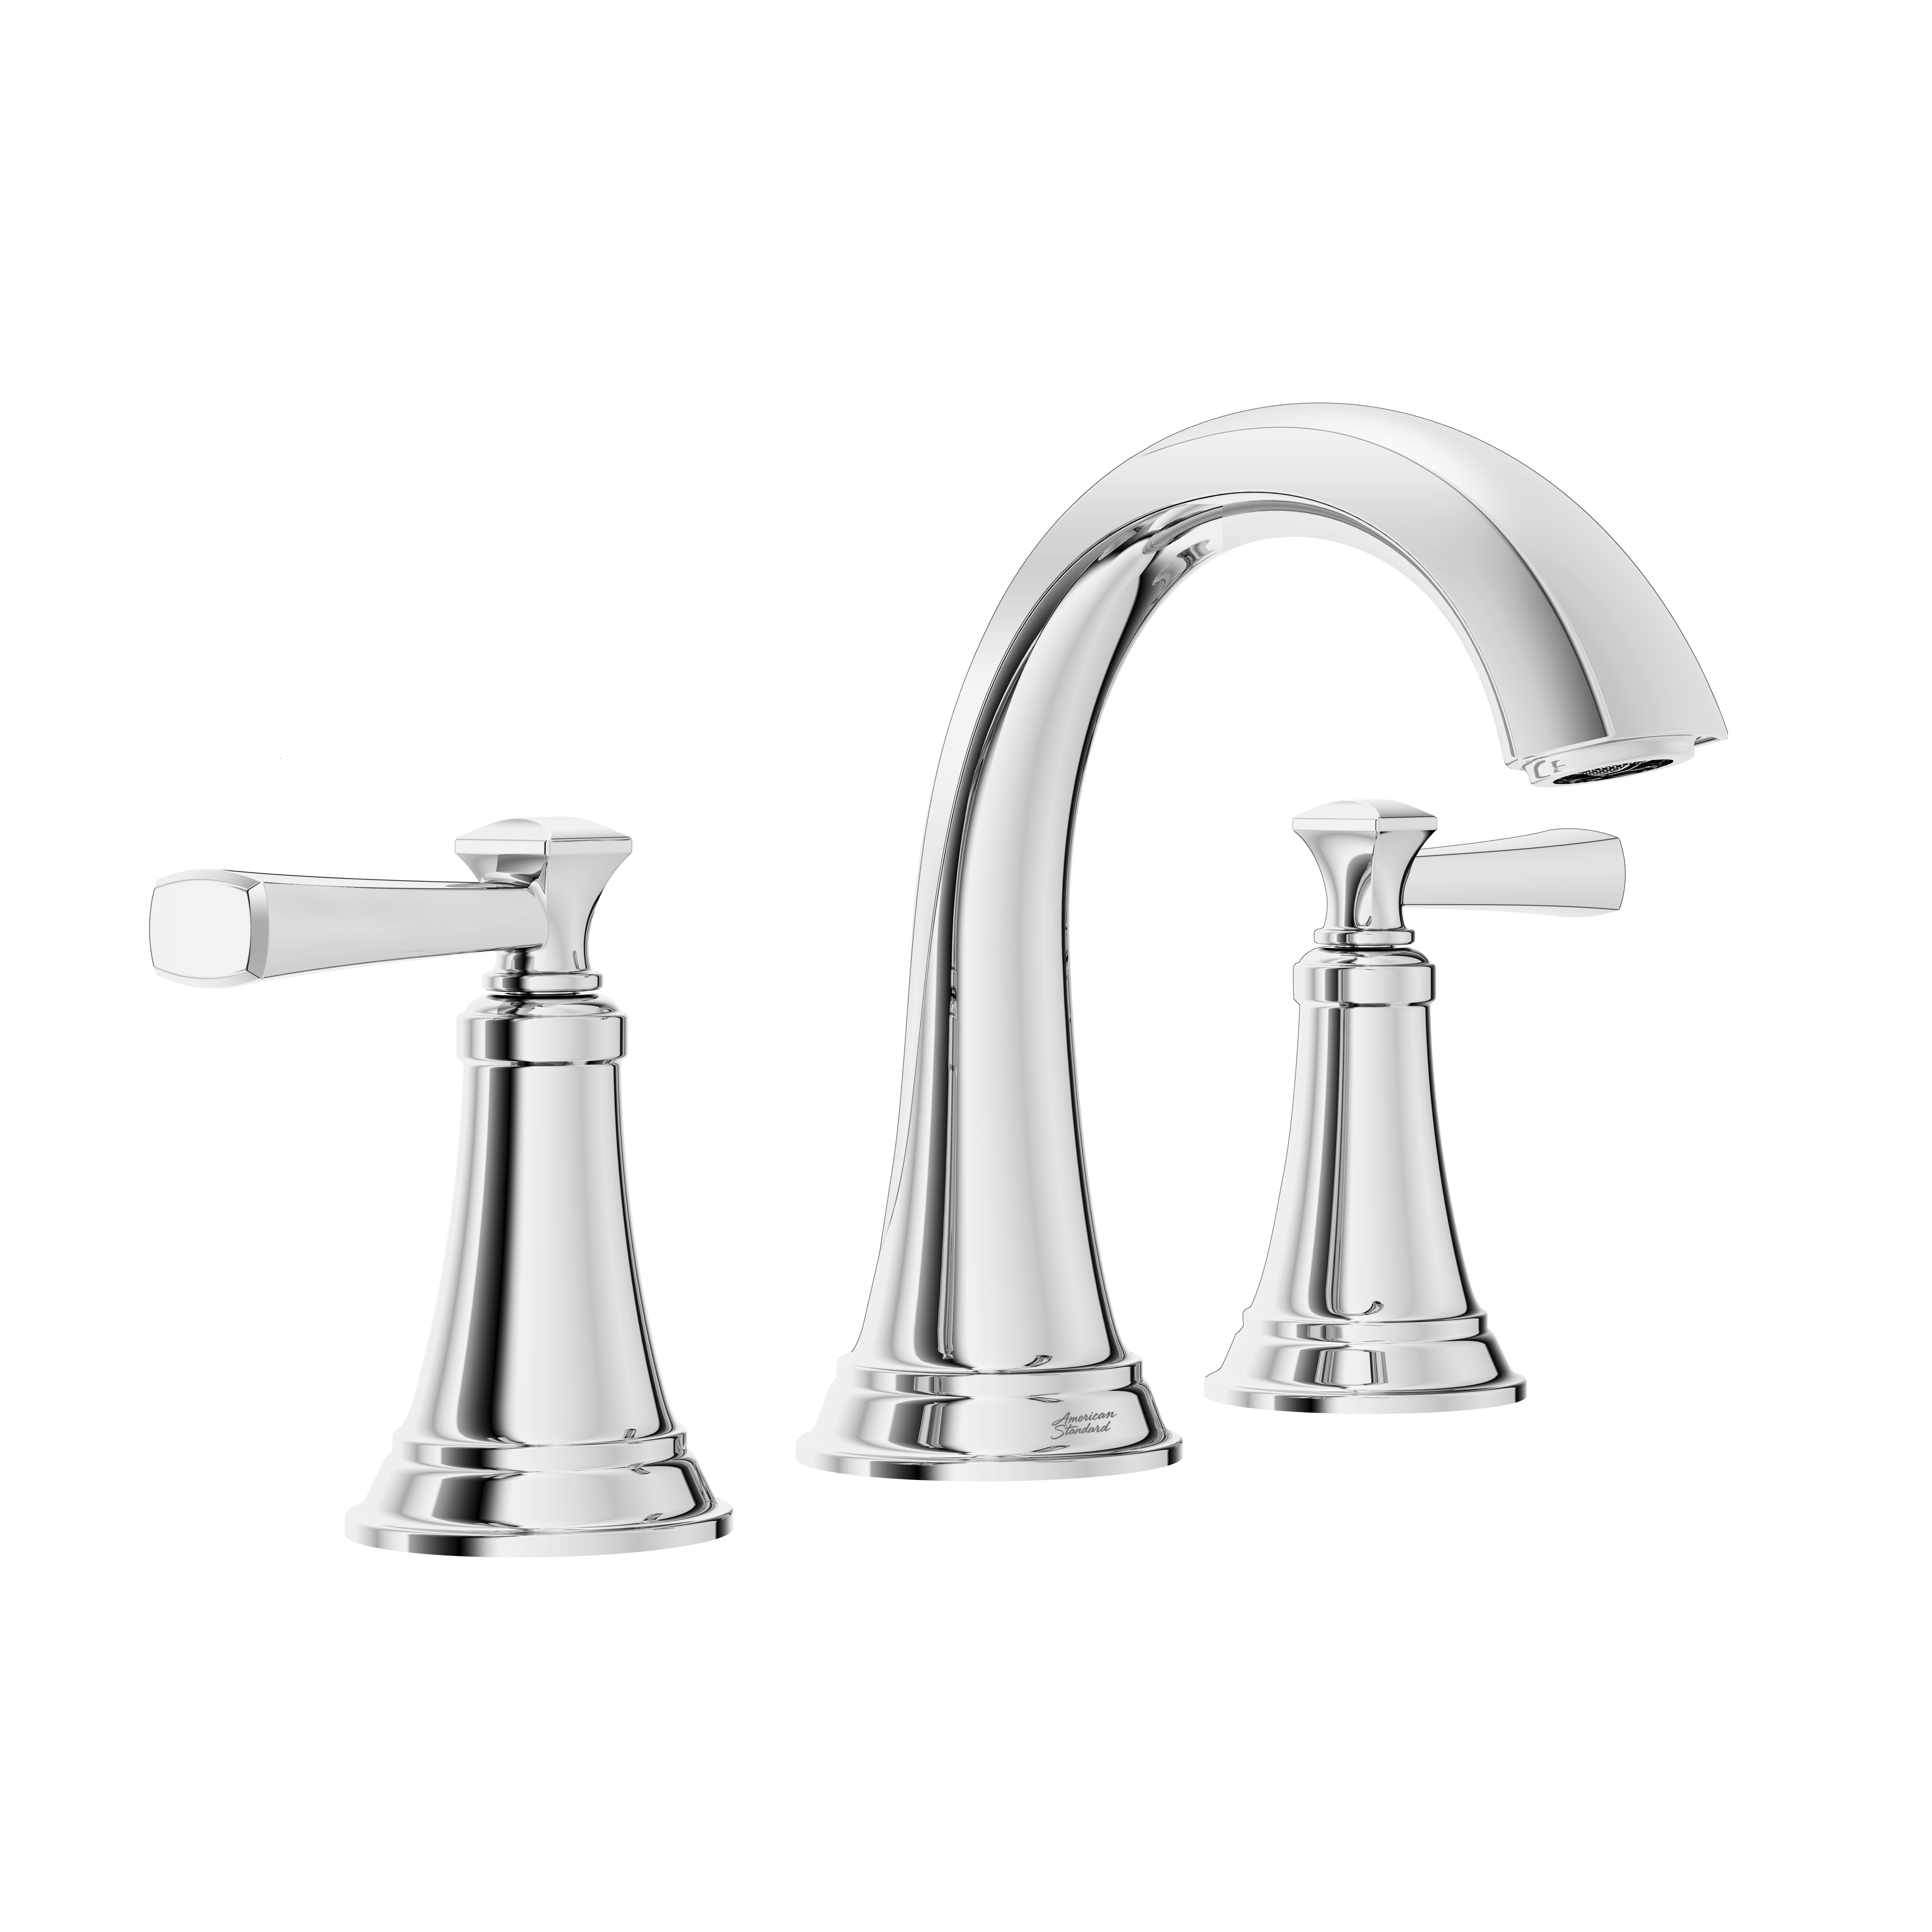 Rumson® 8-Inch Widespread 2-Handle Bathroom Faucet 1.2 gpm/4.5 L/min With Lever Handles